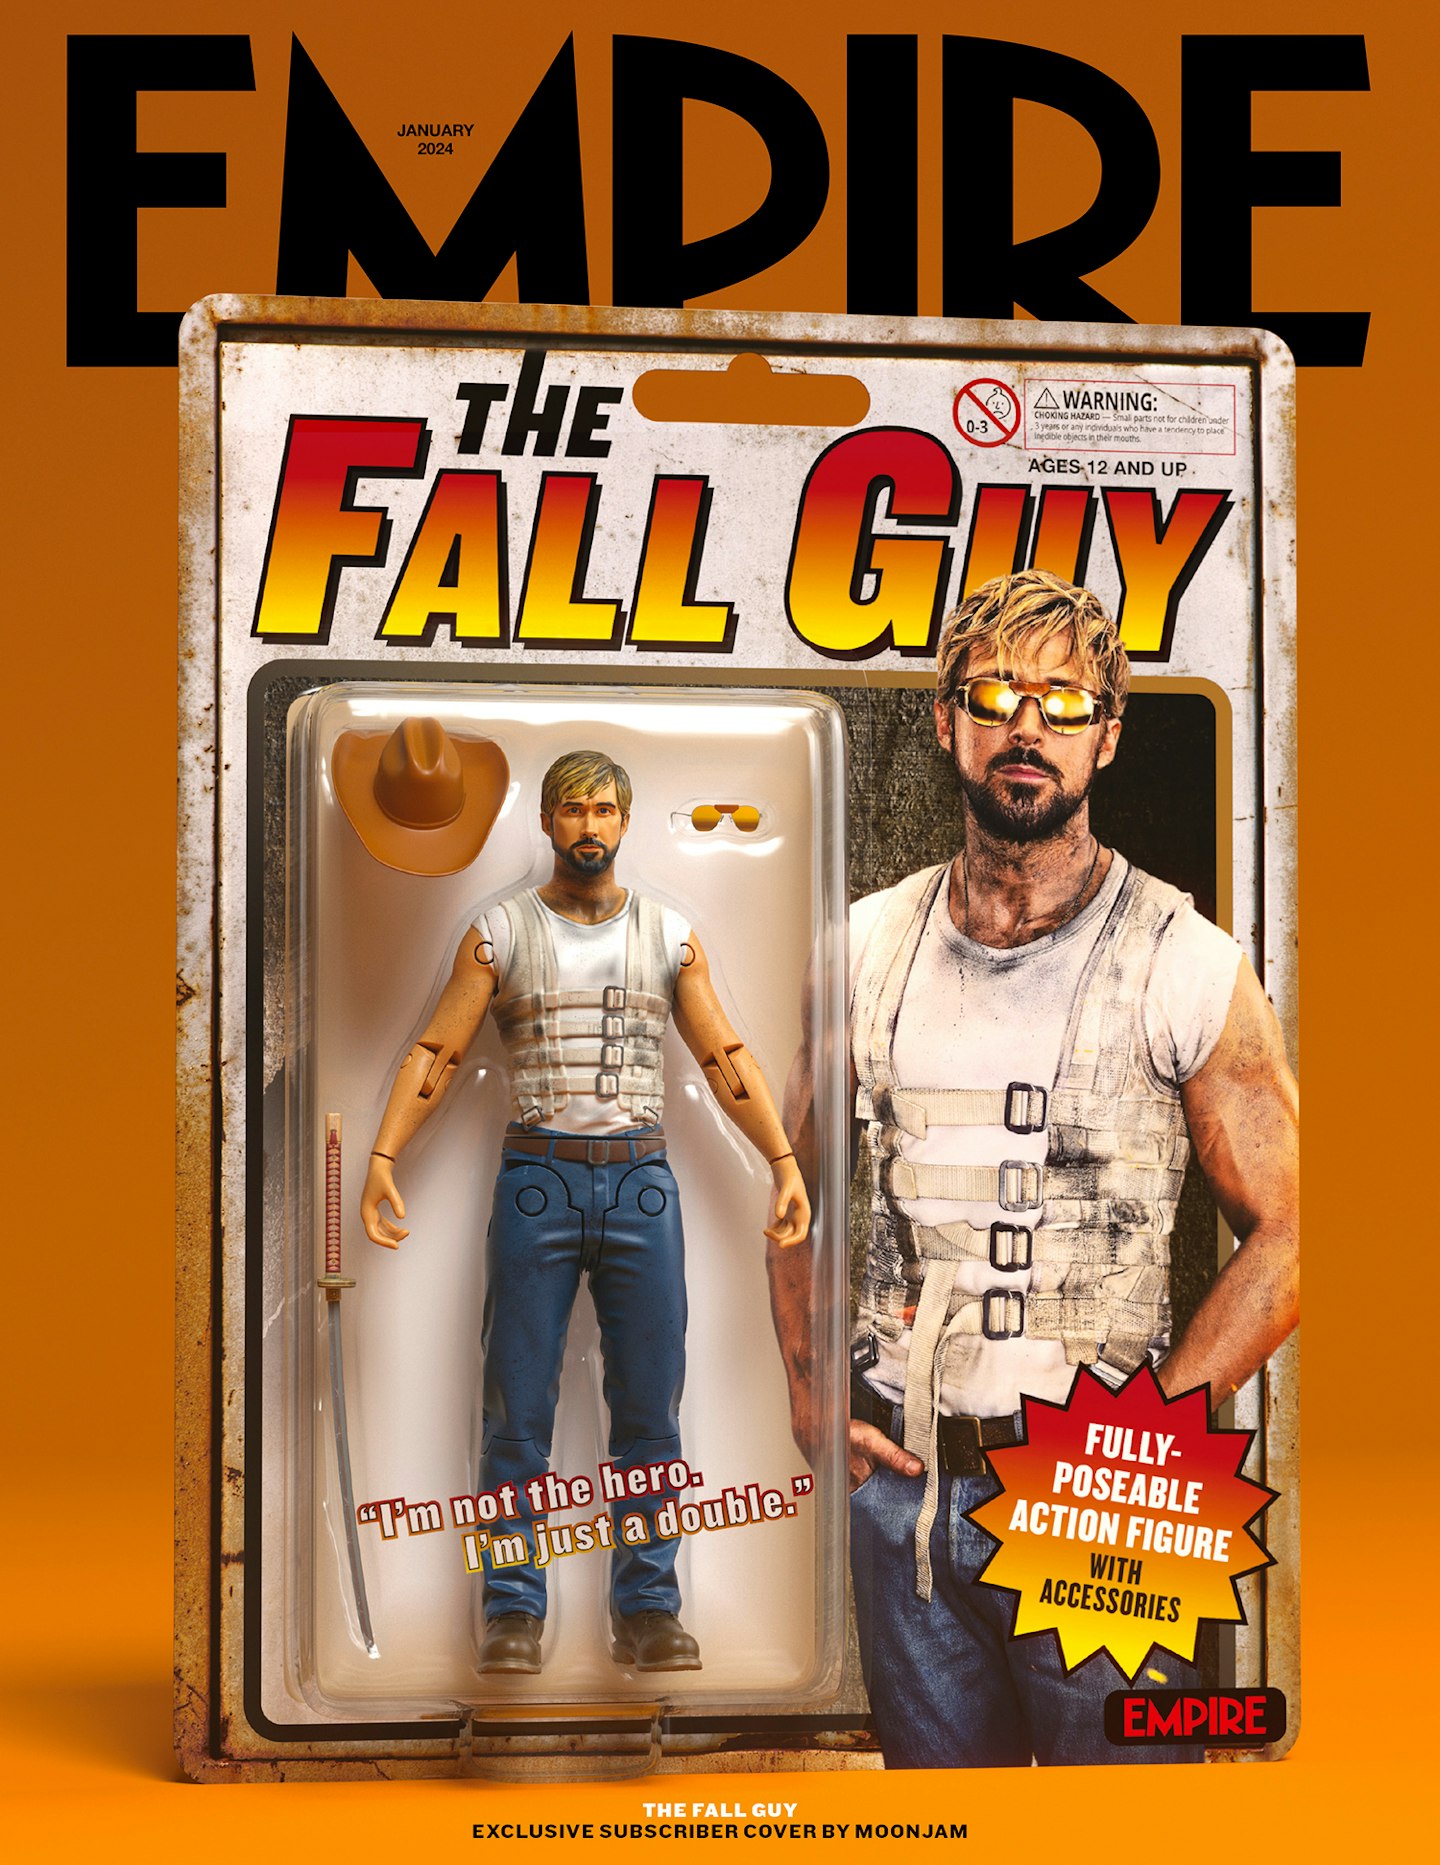 The Fall Guy” Action/Comedy Film Is Coming To Theaters Starring